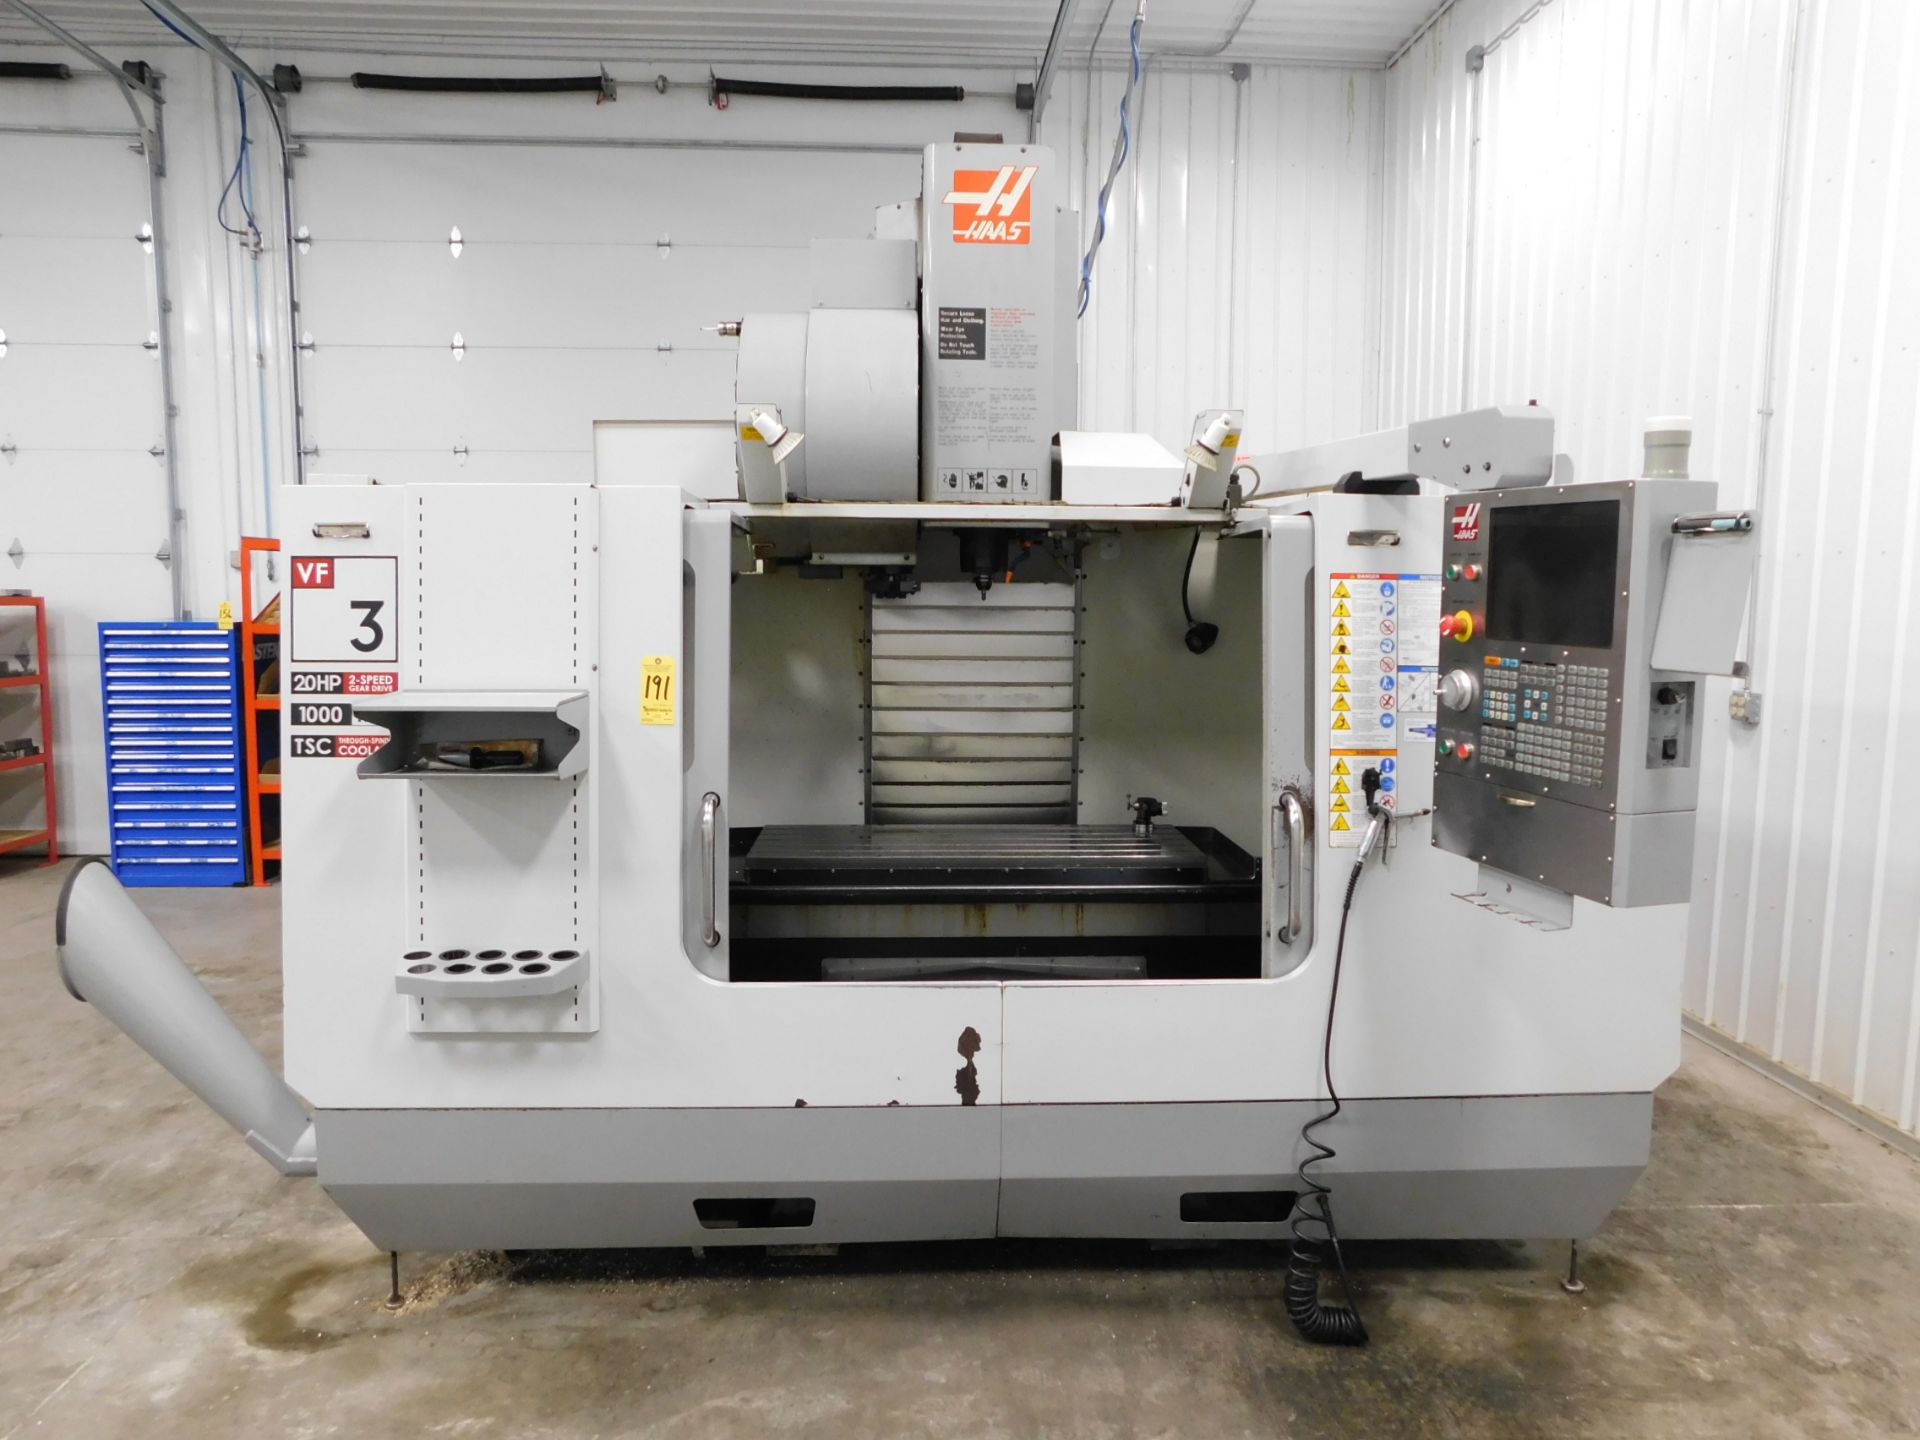 Haas VF-3 Vertical Machining Center sn 1066803, New In 2008, 18"X48" Table, 24ATC, 40Taper - Image 2 of 18